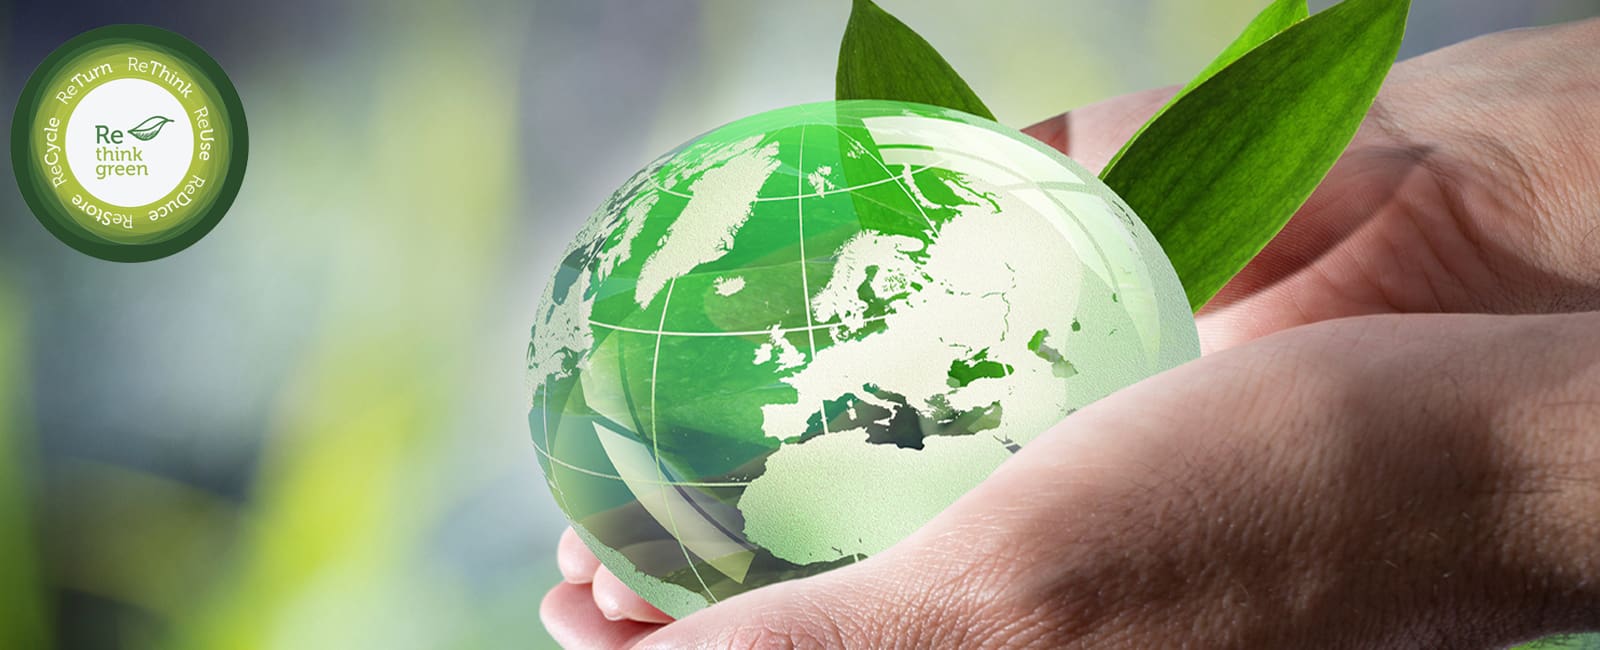 A person holding a green globe with leaves on it.